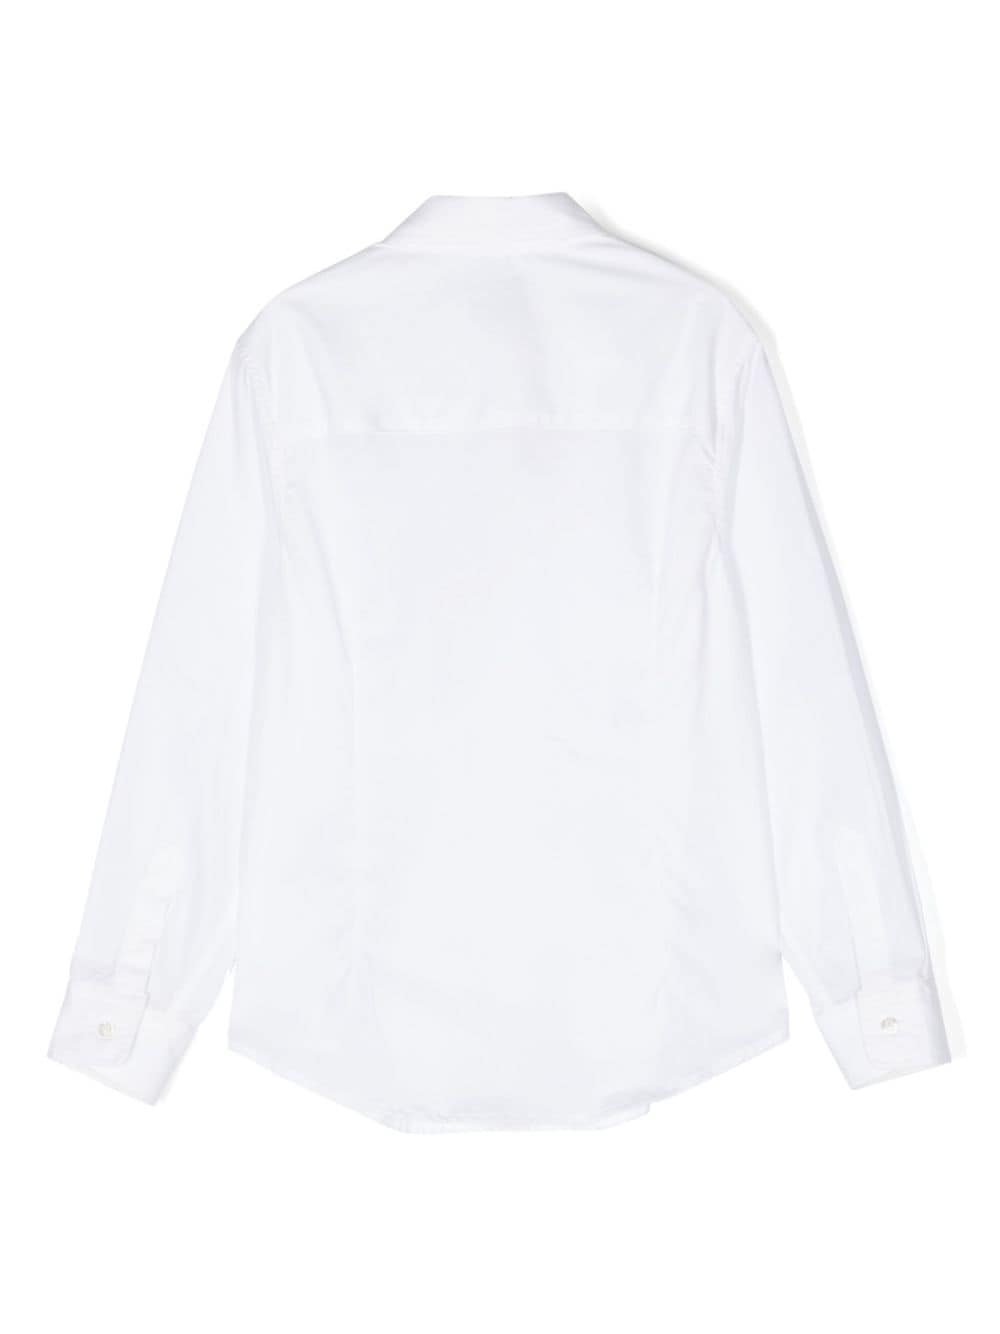 White shirt for boys with logo